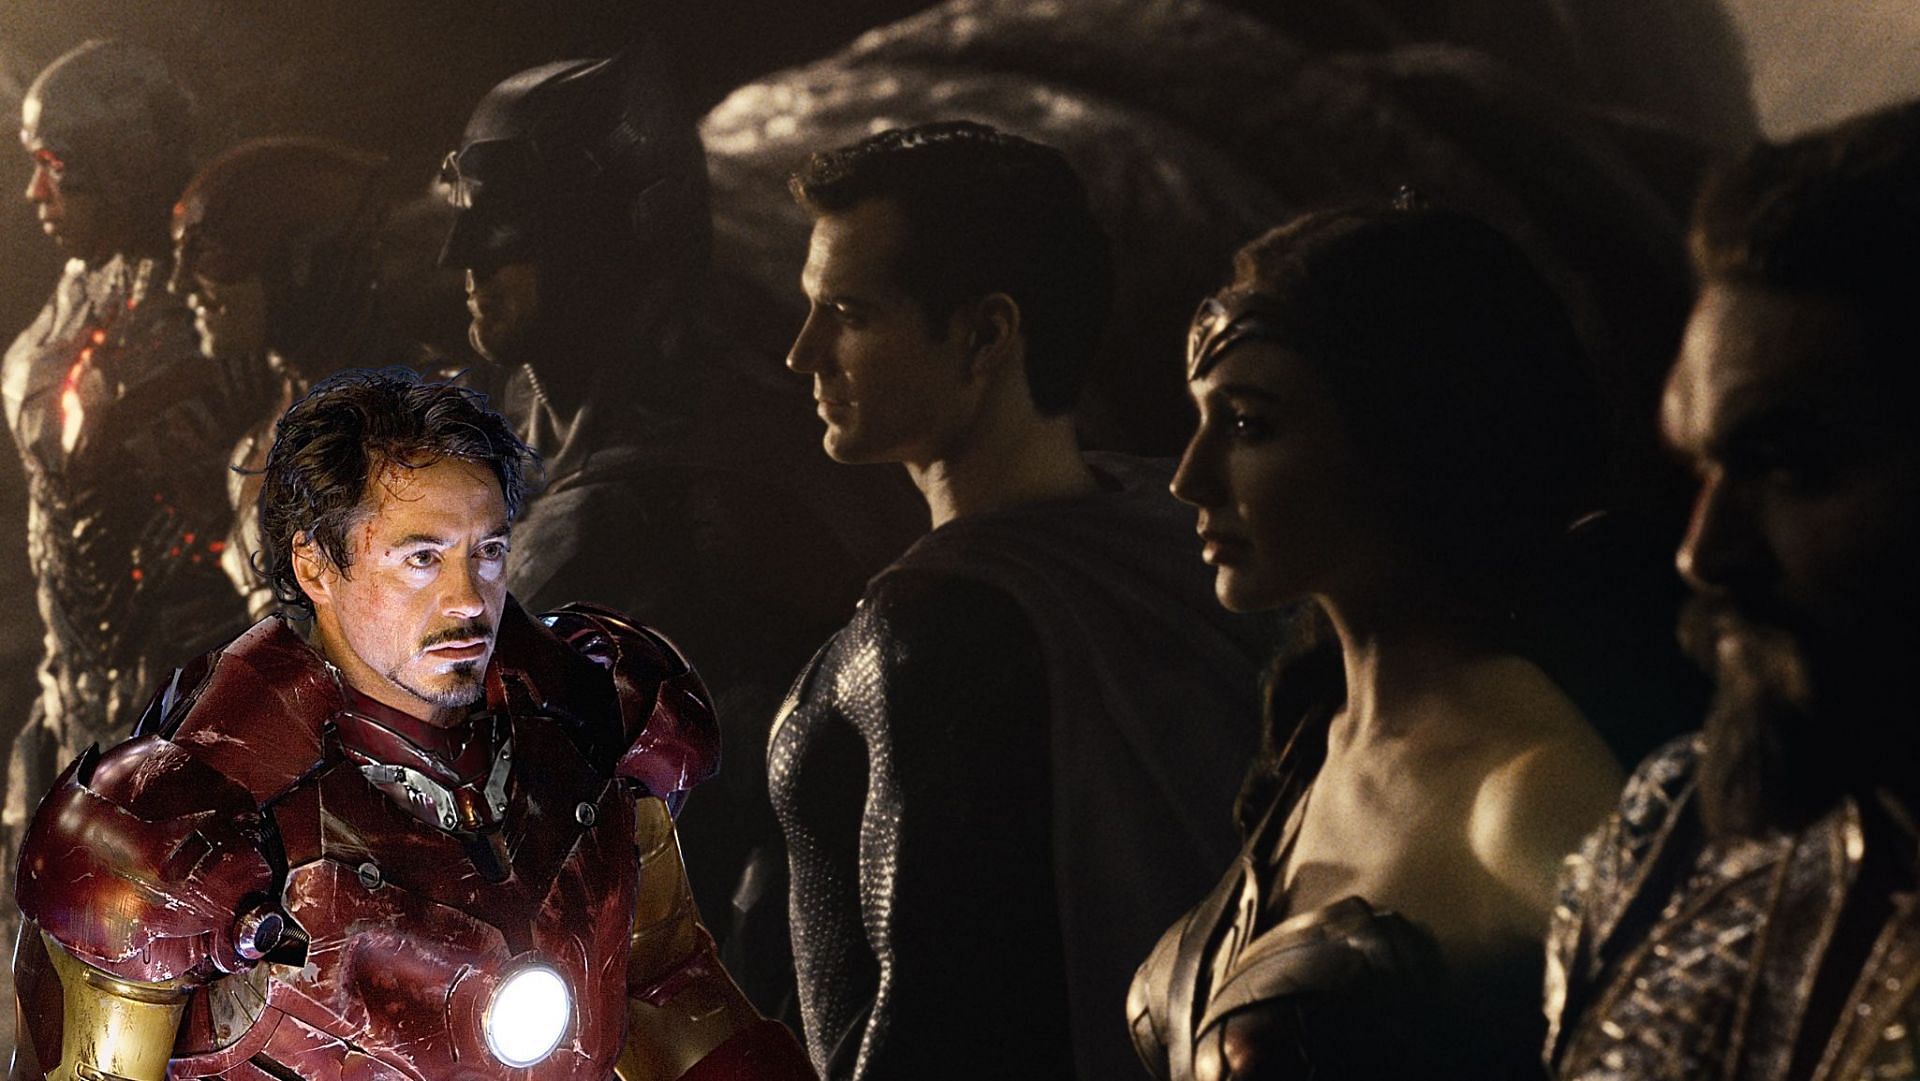 Superheroes unite: The Justice League members who could take down Iron Man (Image via DC Studios)